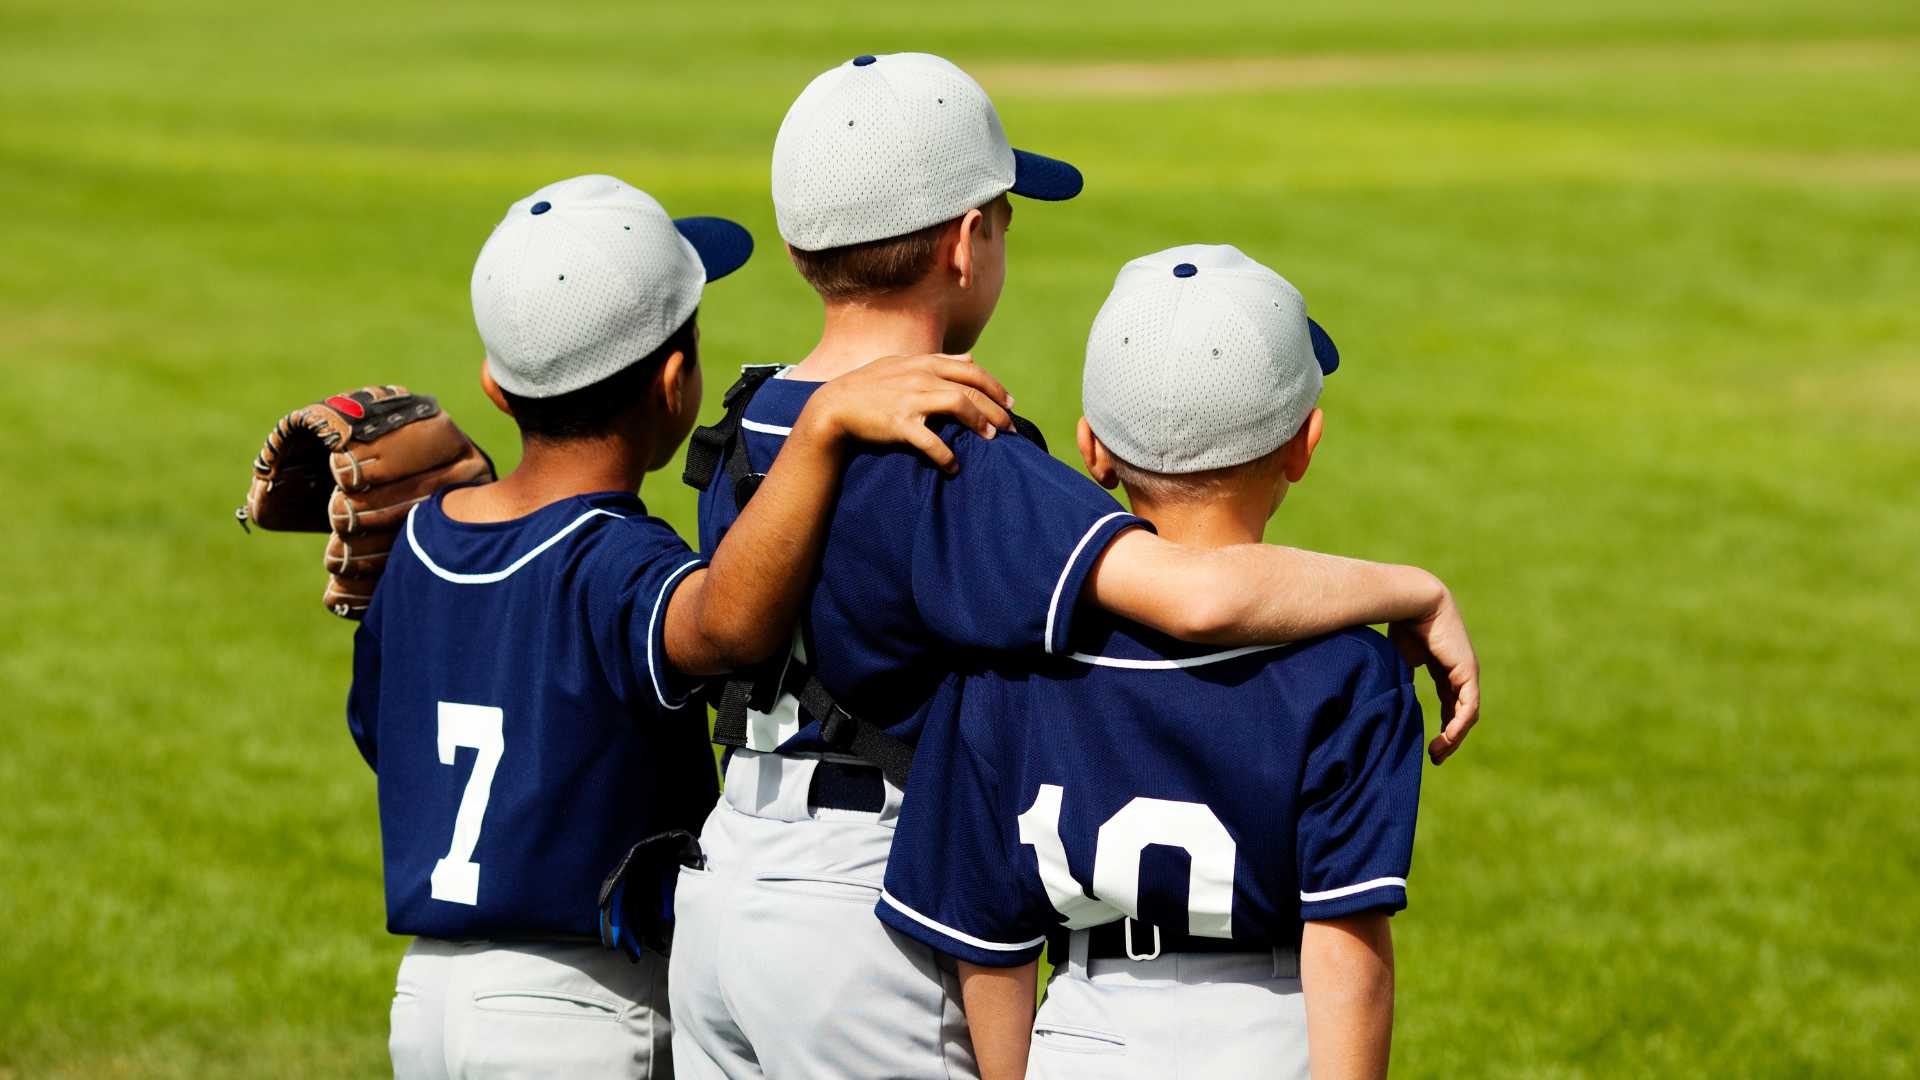 Mum’s Quick Actions Save 6-Year-Old Son After Baseball Accident